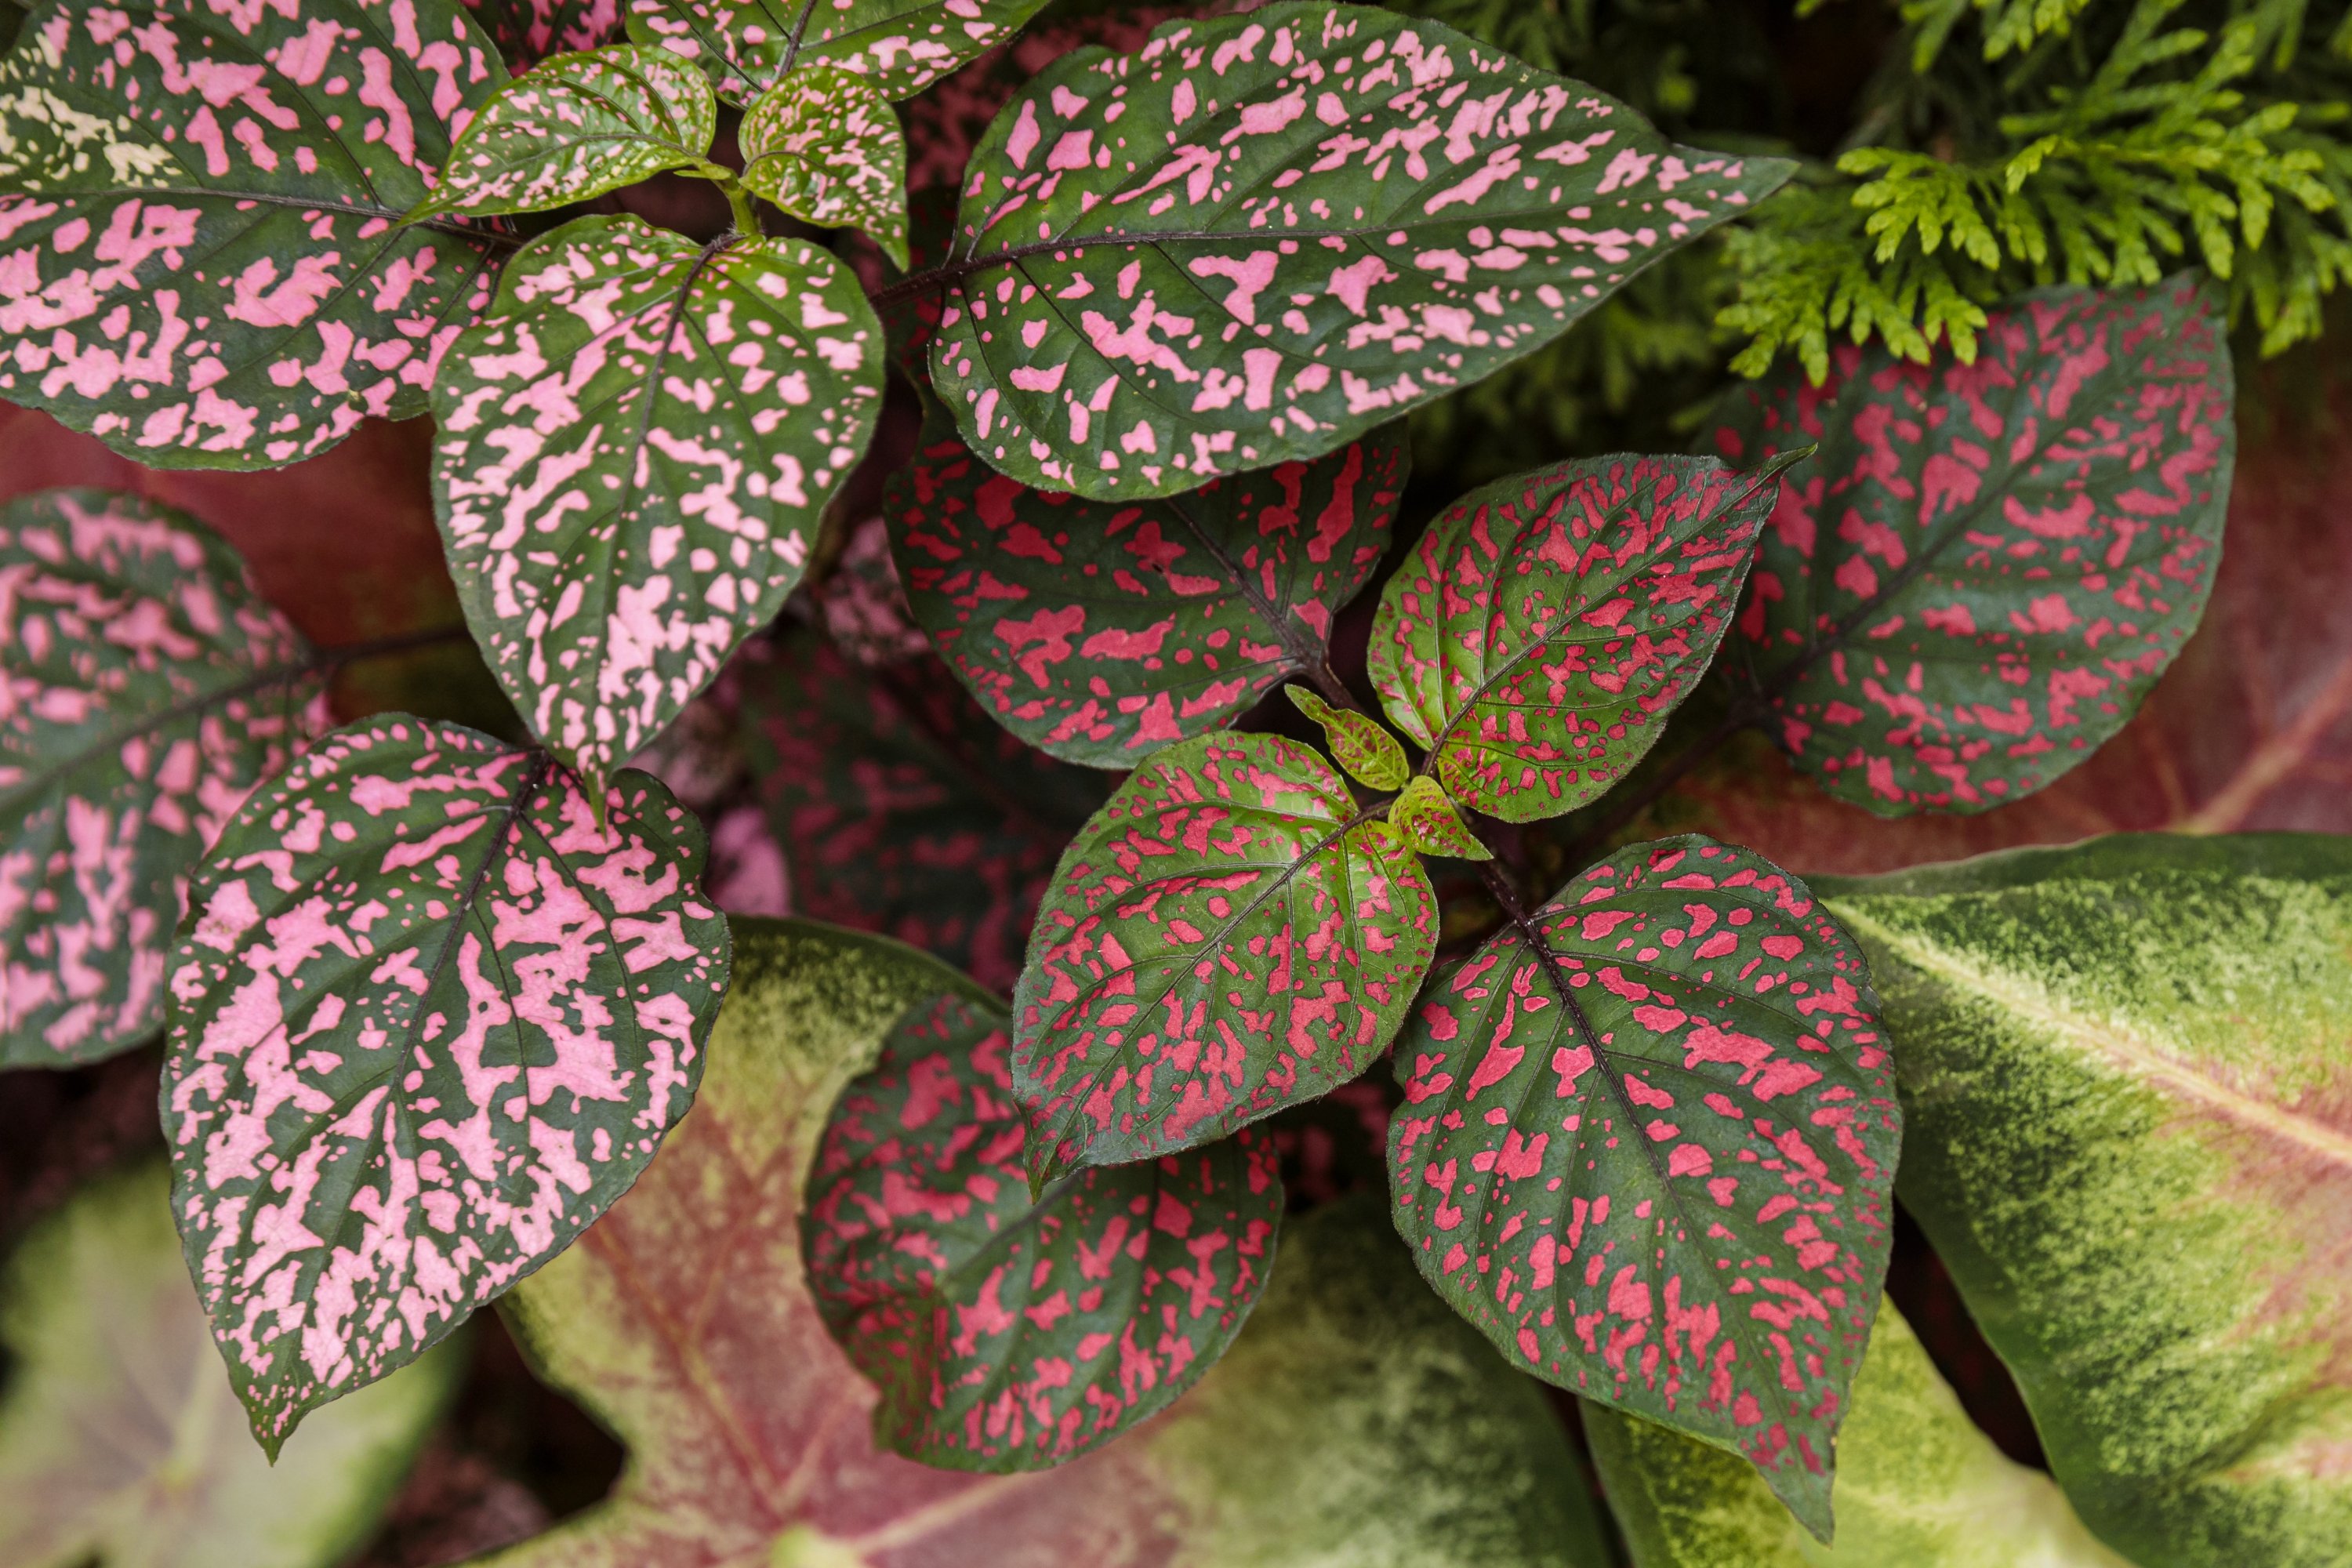 How to Grow and Care for Polka Dot Plant